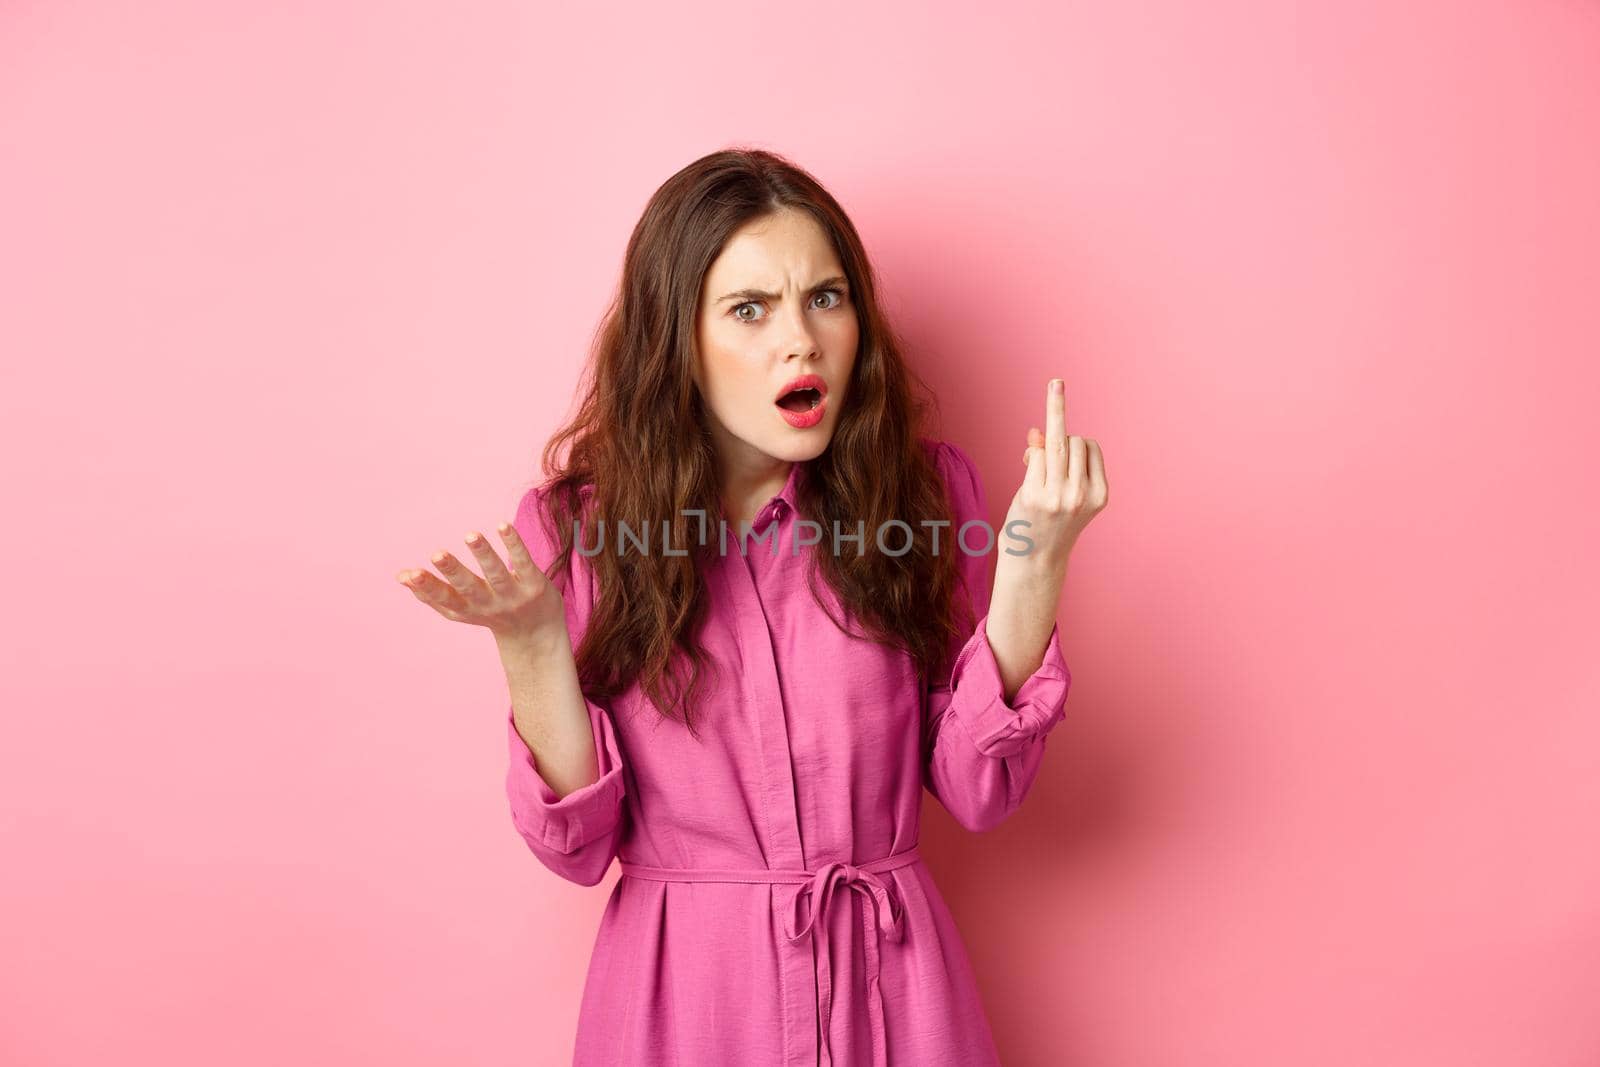 Annoyed girlfriend arguing about proposal, wants to get married, showing finger without engagement ring, standing confused against pink background.